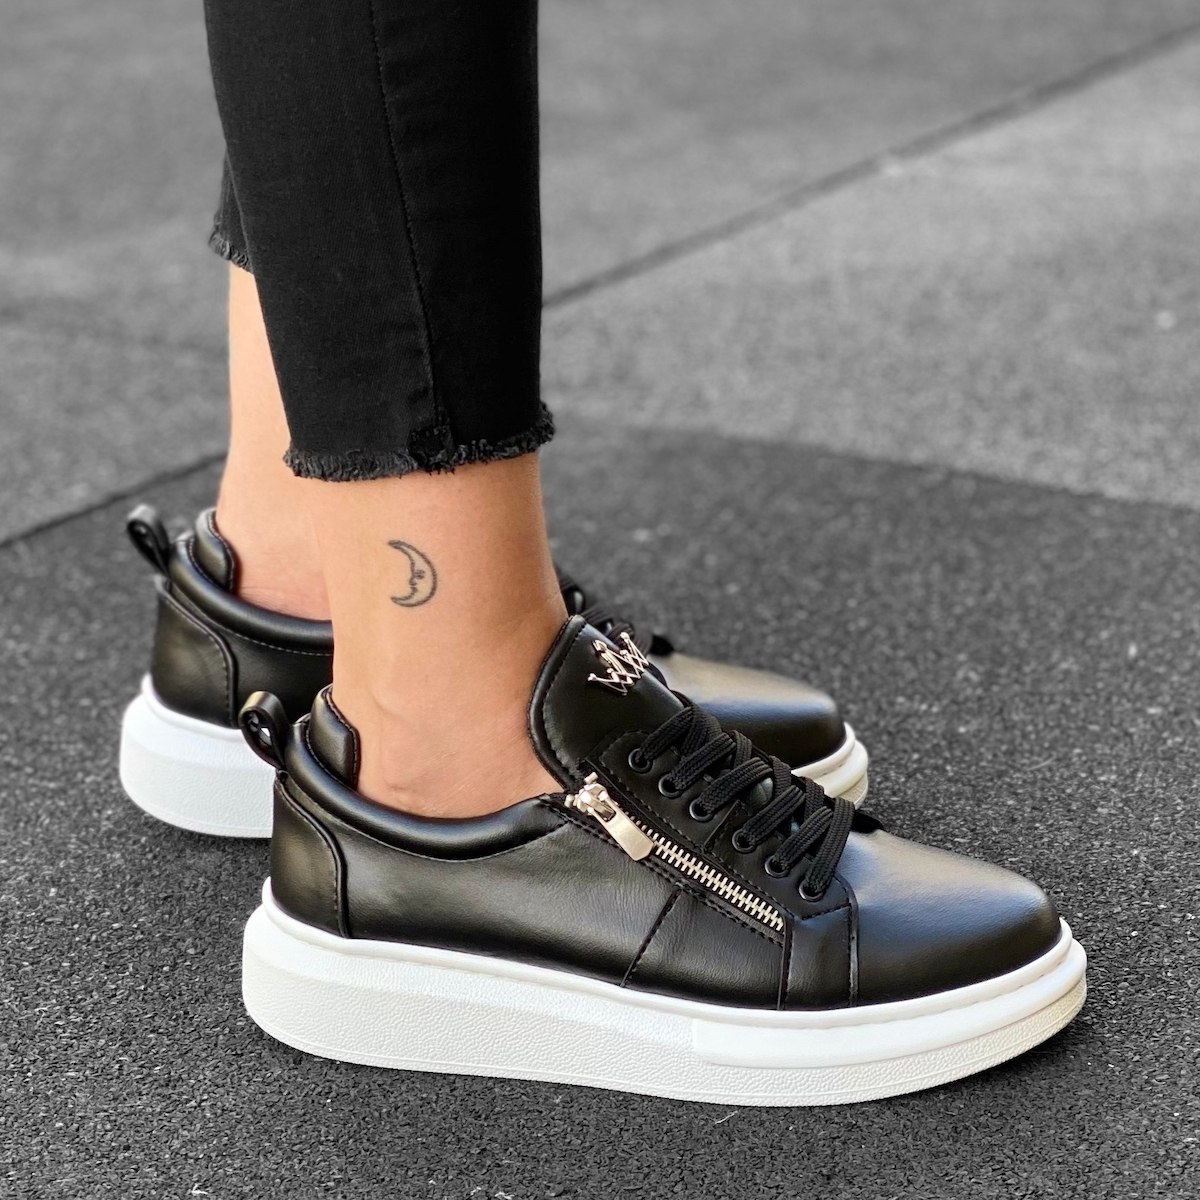 Women's Chunky Sneakers with Zippers in Black and White | Martin Valen